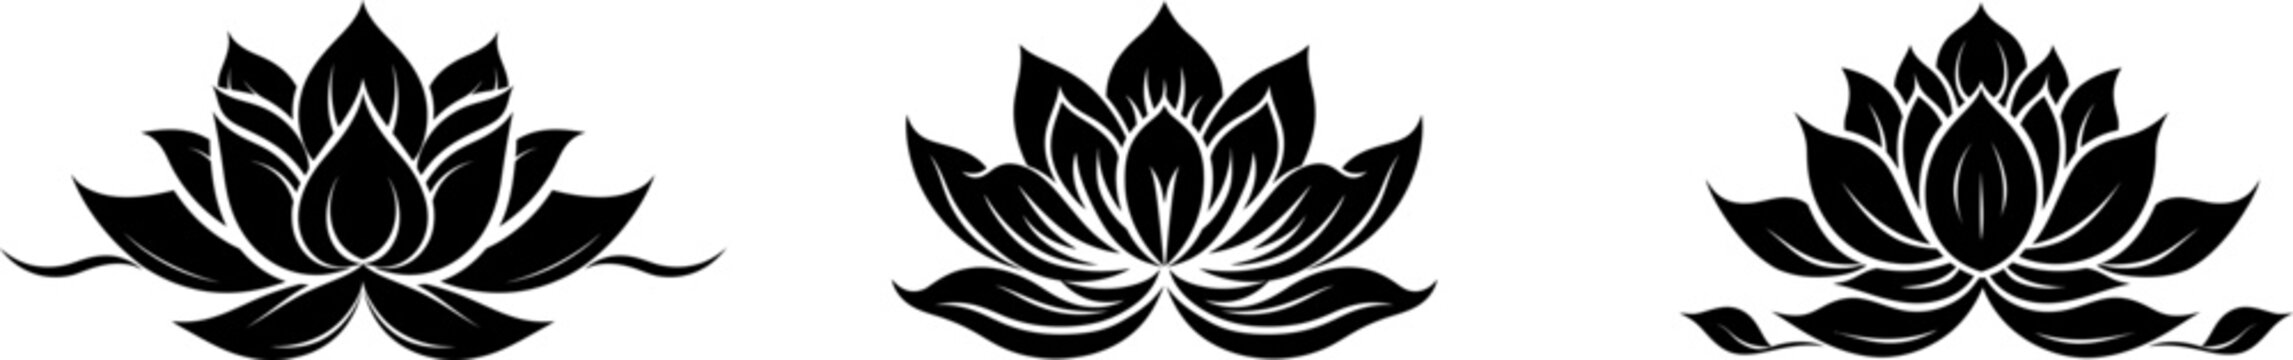 Set lotus flower icons. Simple black lotus silhouette .Vector lotus icons collection.